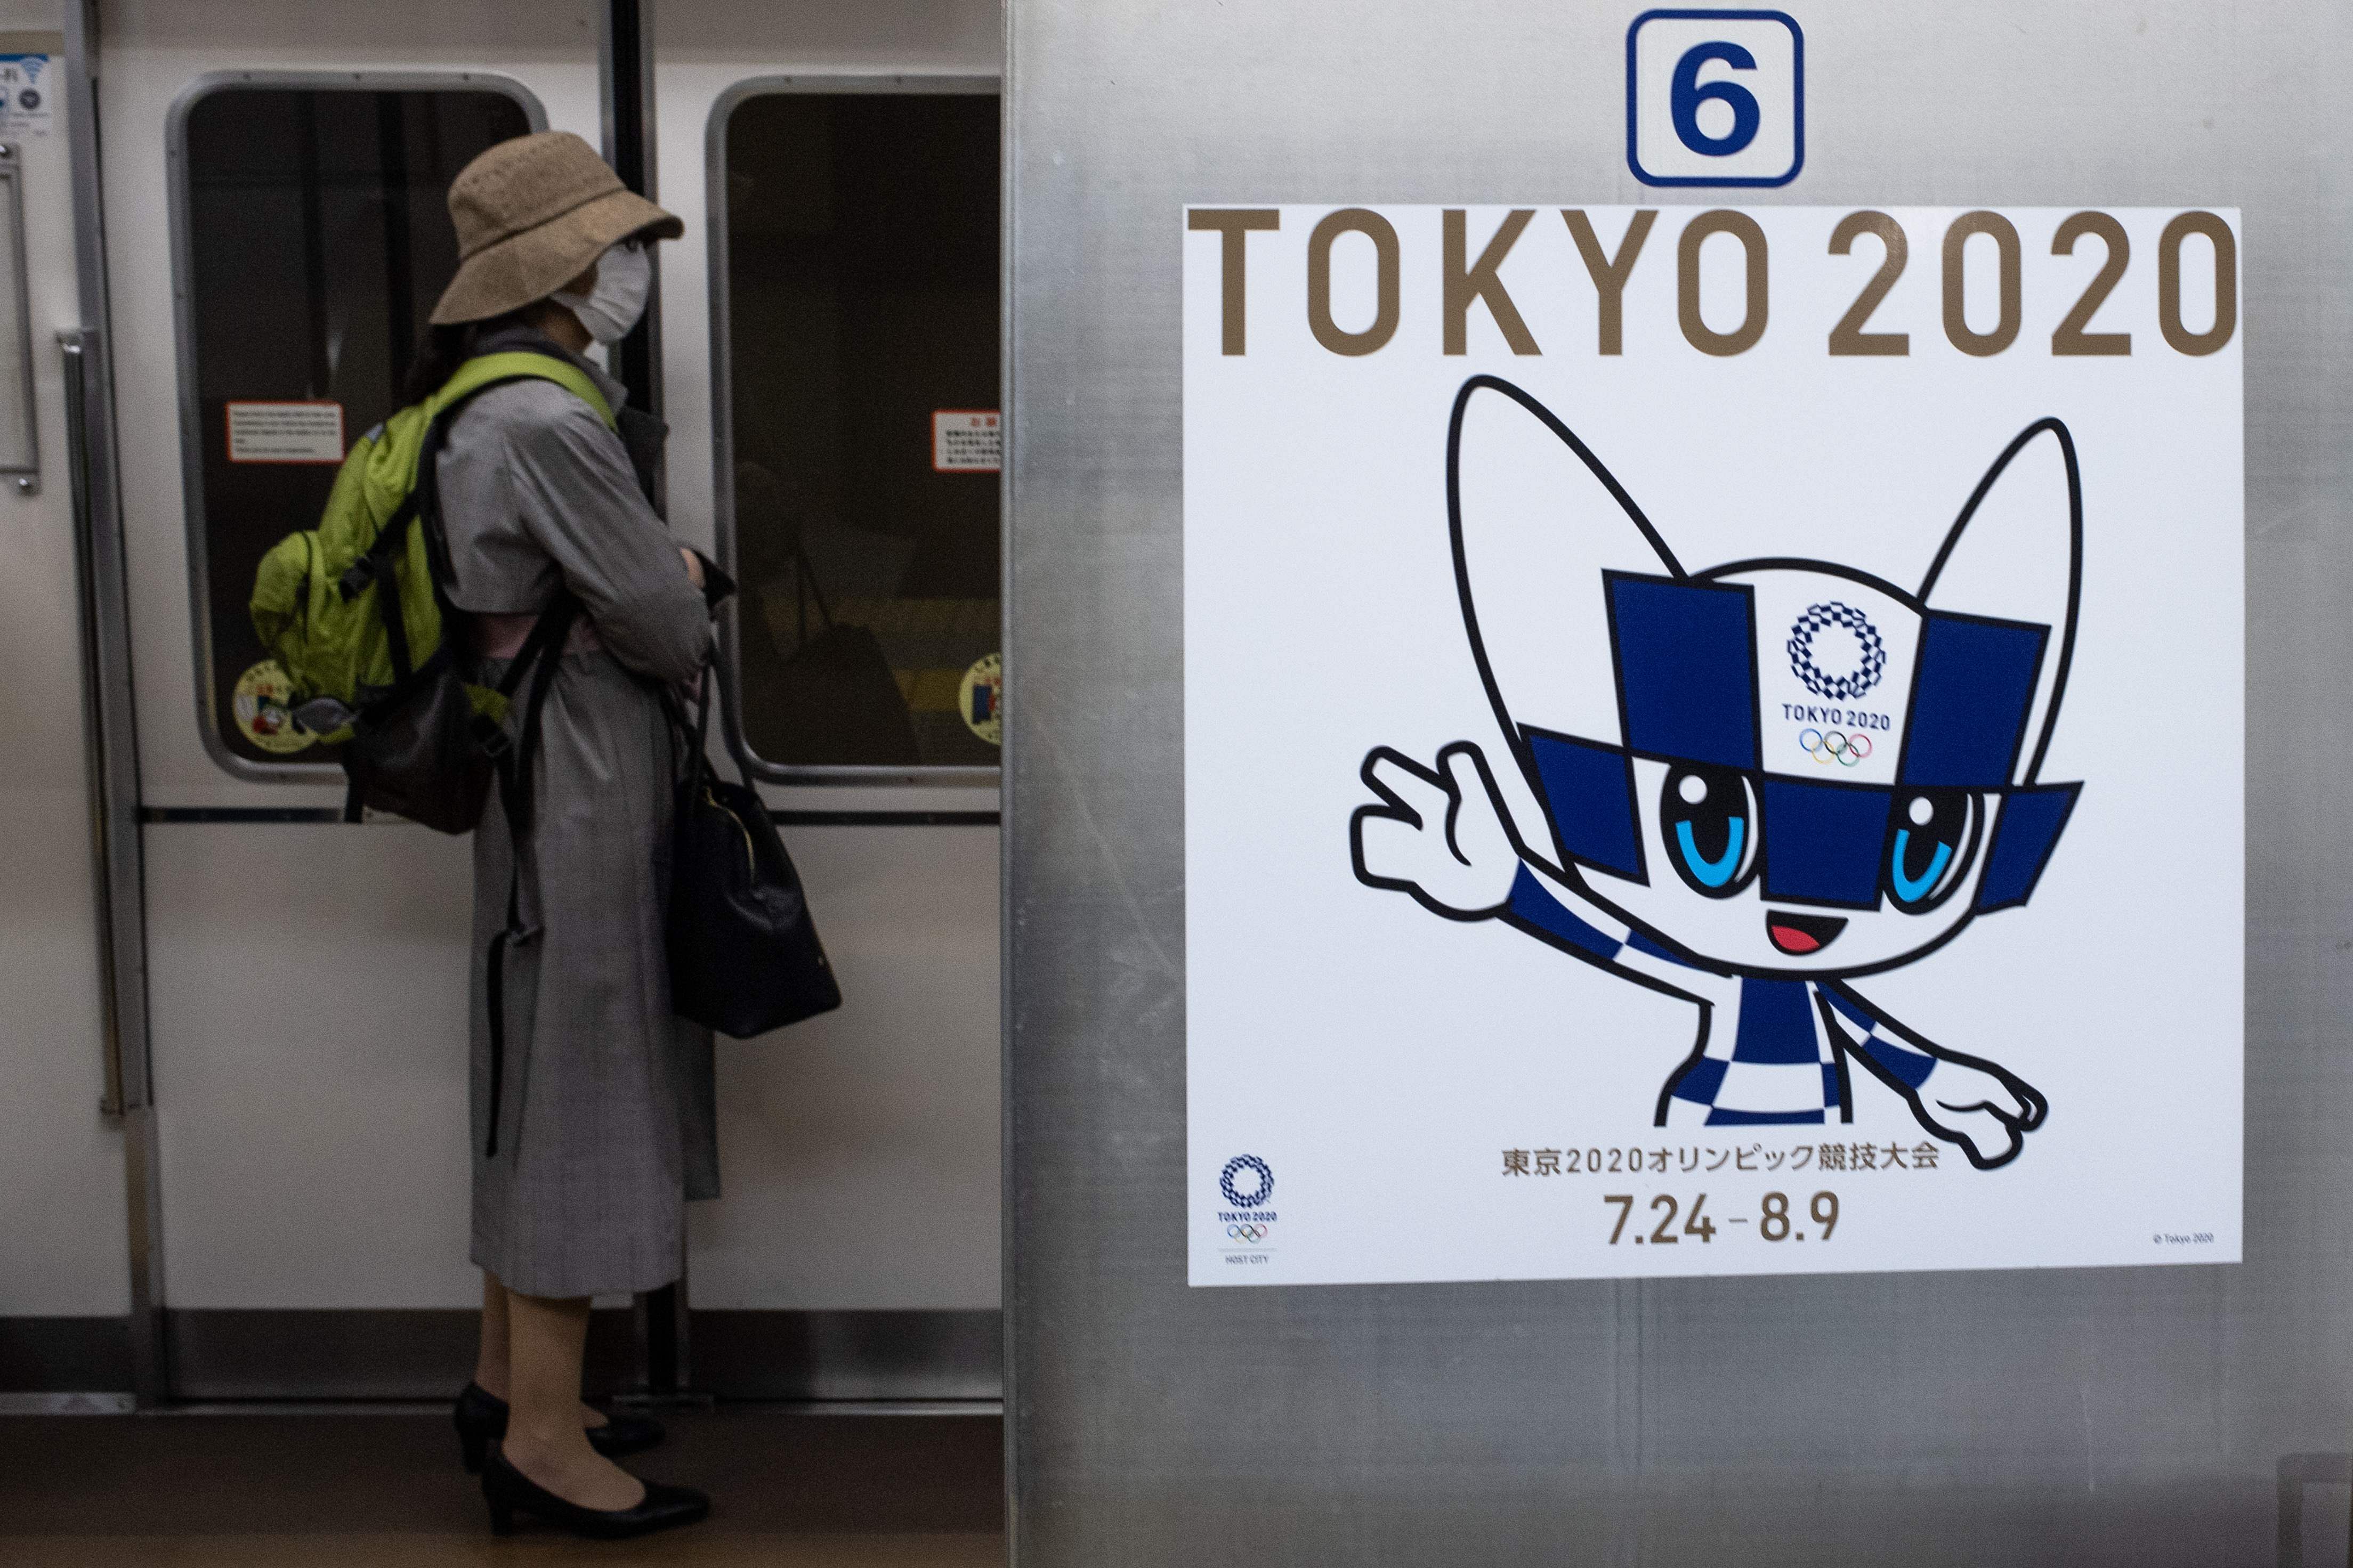 A passenger wearing a face mask stands next to a poster of Tokyo 2020 Olympic mascot Miraitowa on a train in Tokyo. (AFP photo)